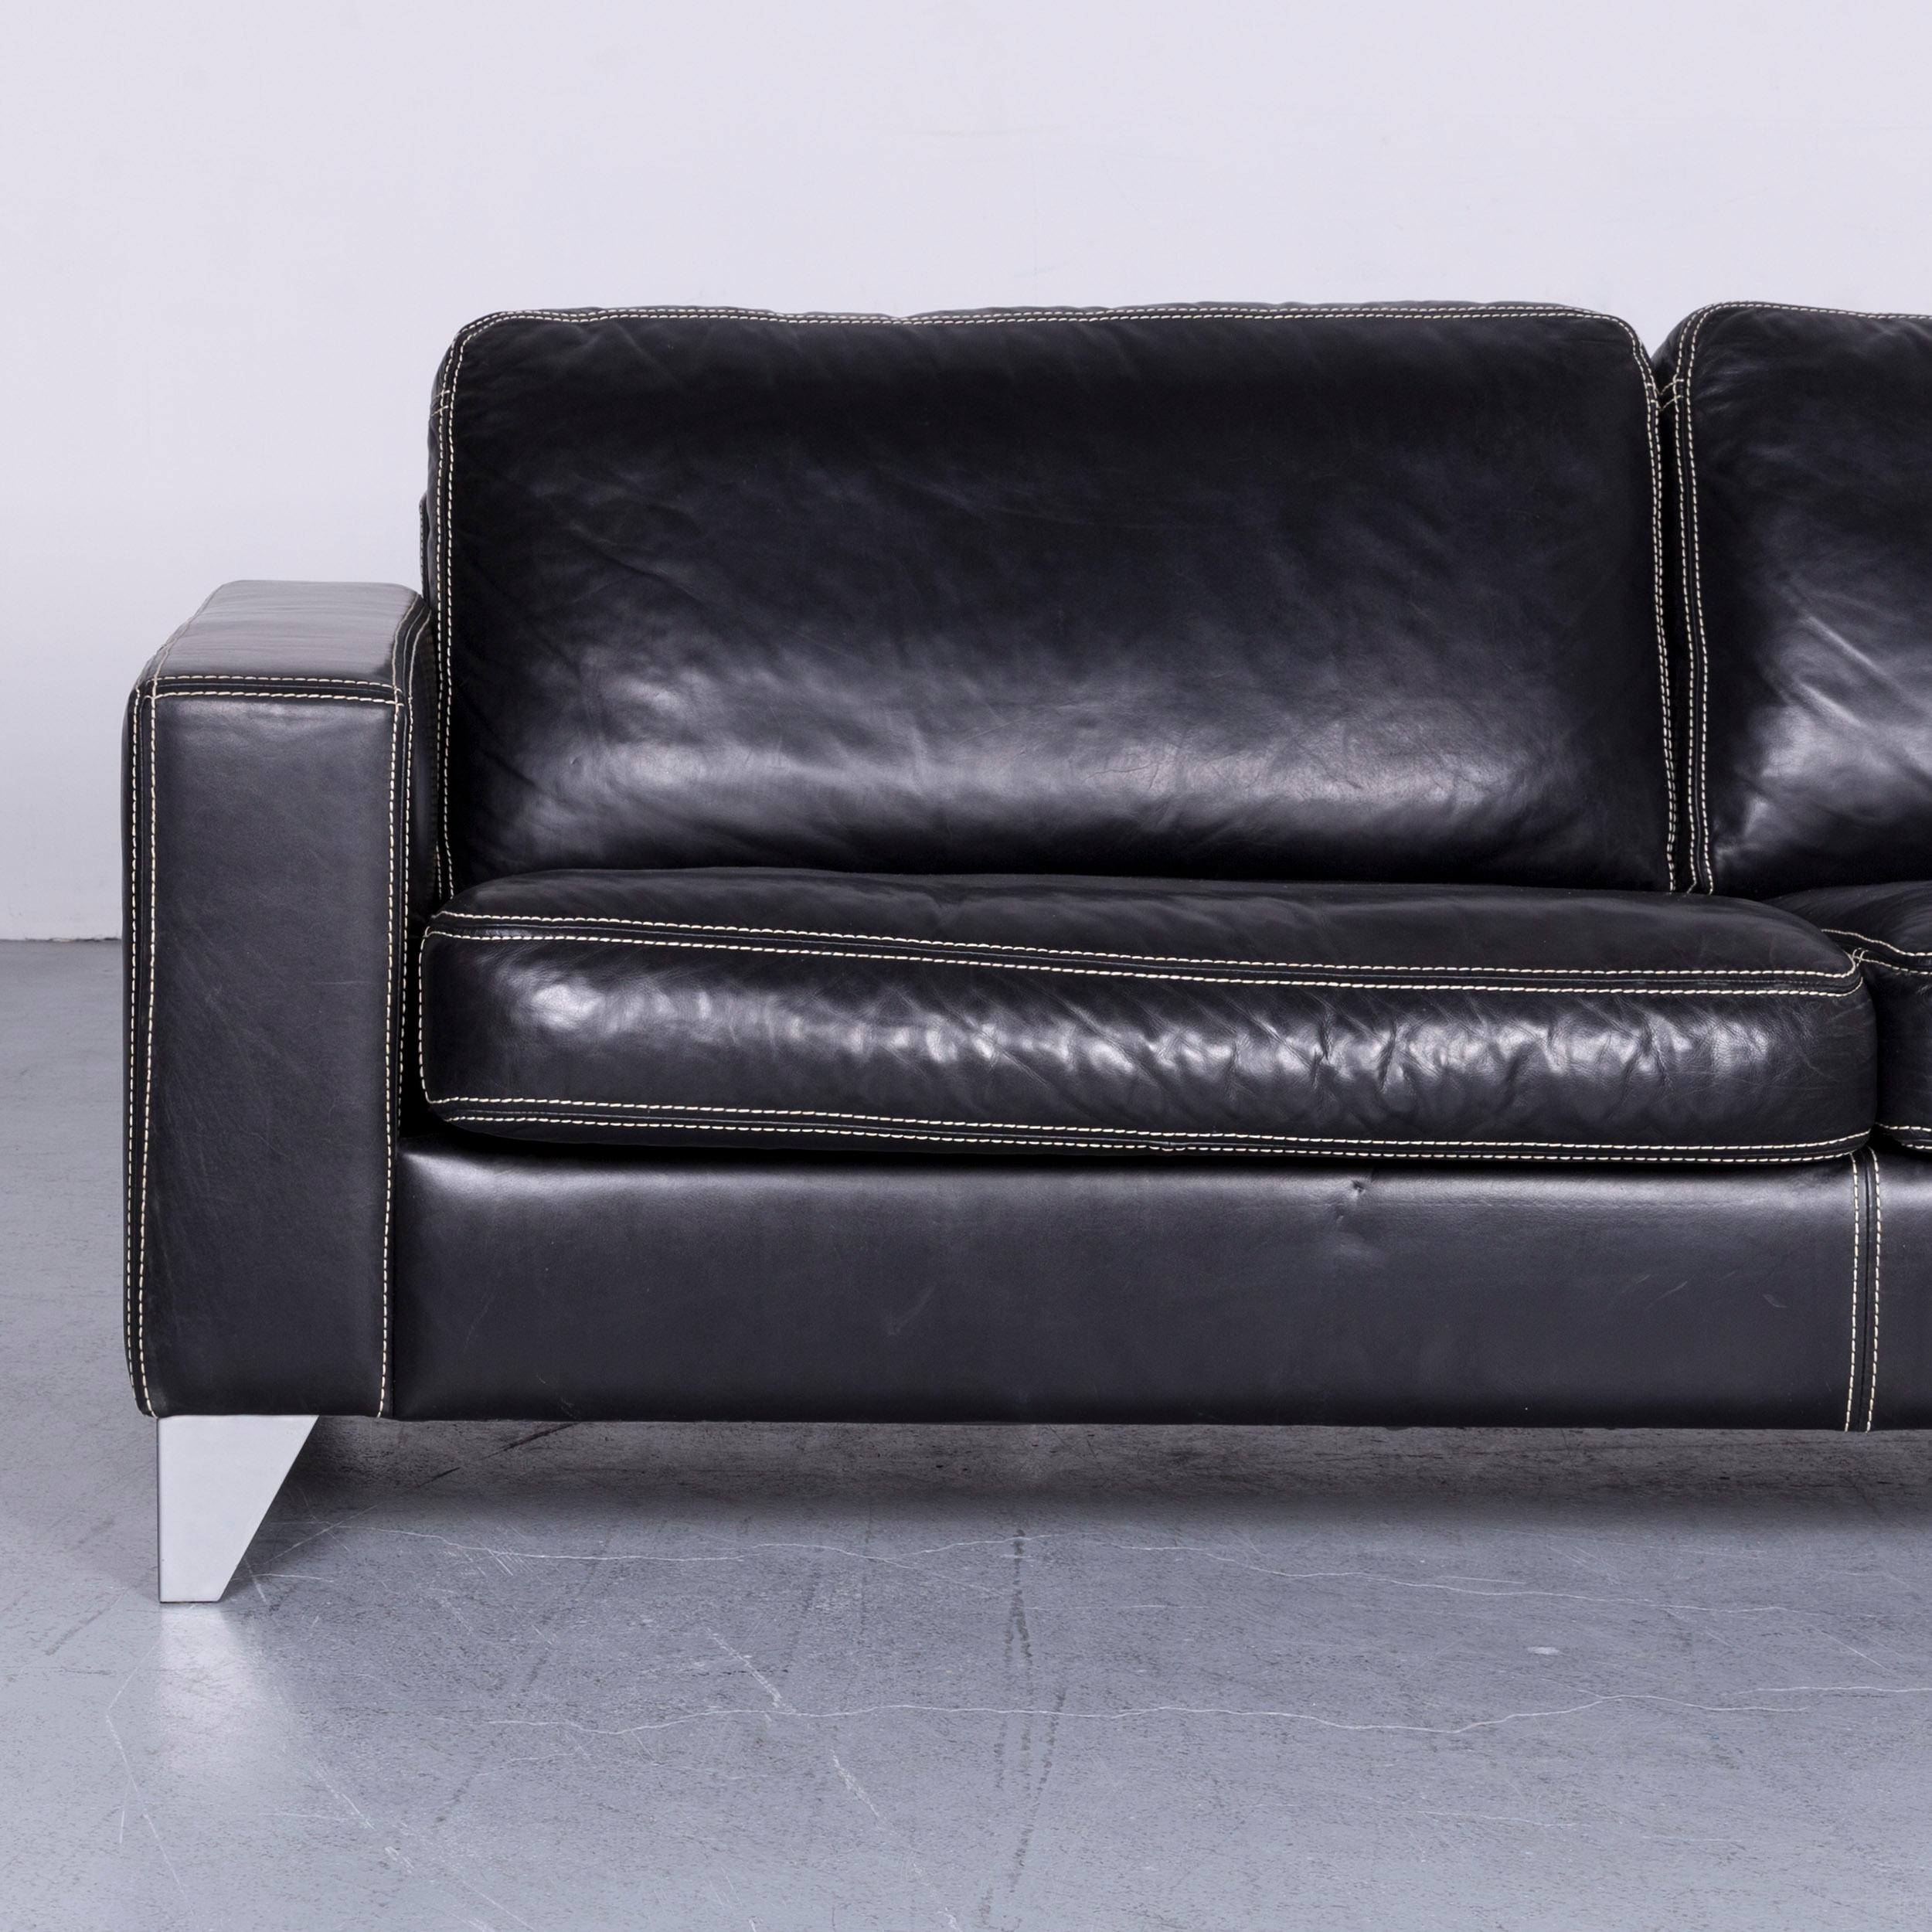 Activineo Designer Leather Sofa Black Two-Seat Couch In Good Condition For Sale In Cologne, DE